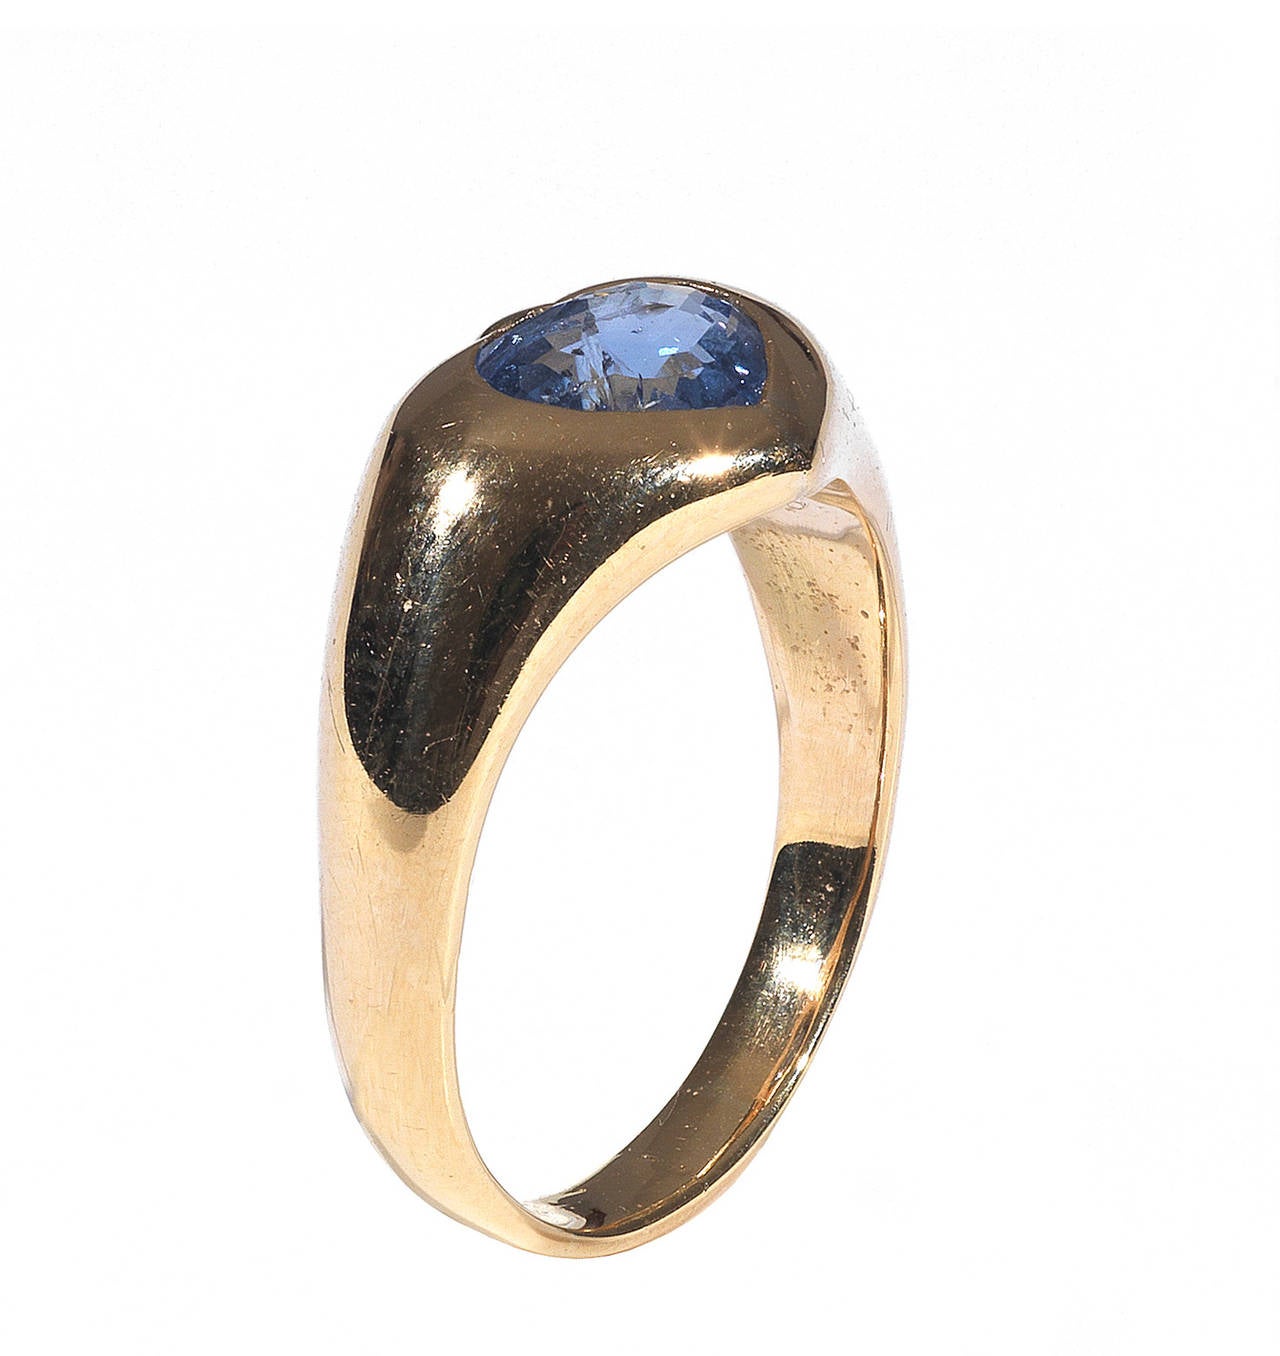 Classic yet prominent cocktail ring created by
Bulgari in Italy in the 1980's. It features an approx. 2.25 carat natural Ceylon heart-shape sapphire. The ring is made of yellow gold.

The ring is size 7 and can be re-sized if needed.